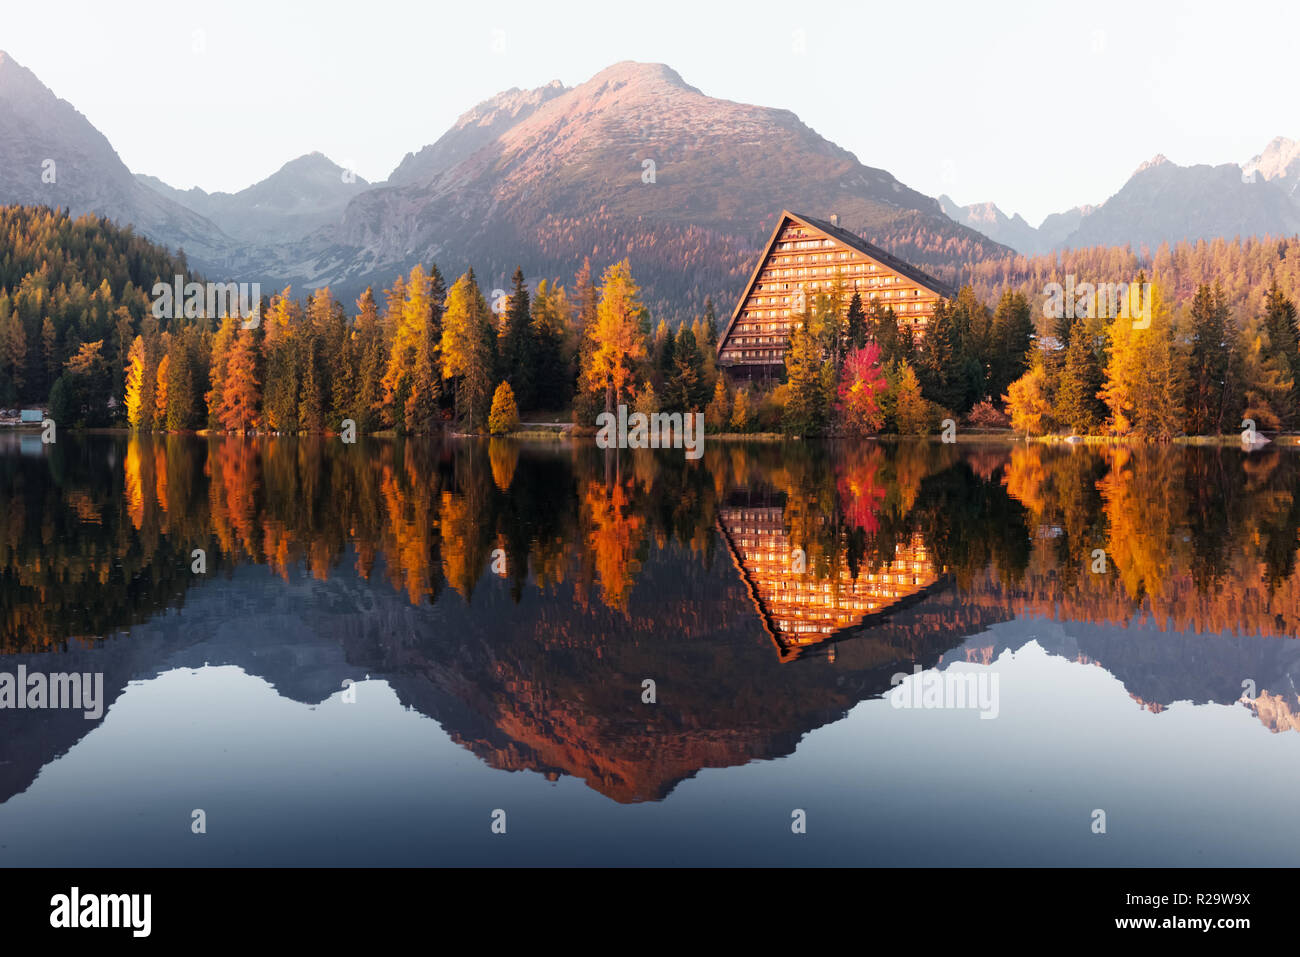 Picturesque autumn view of lake Strbske pleso in High Tatras National Park, Slovakia. Clear water with reflections of orange larch and high mountains Stock Photo